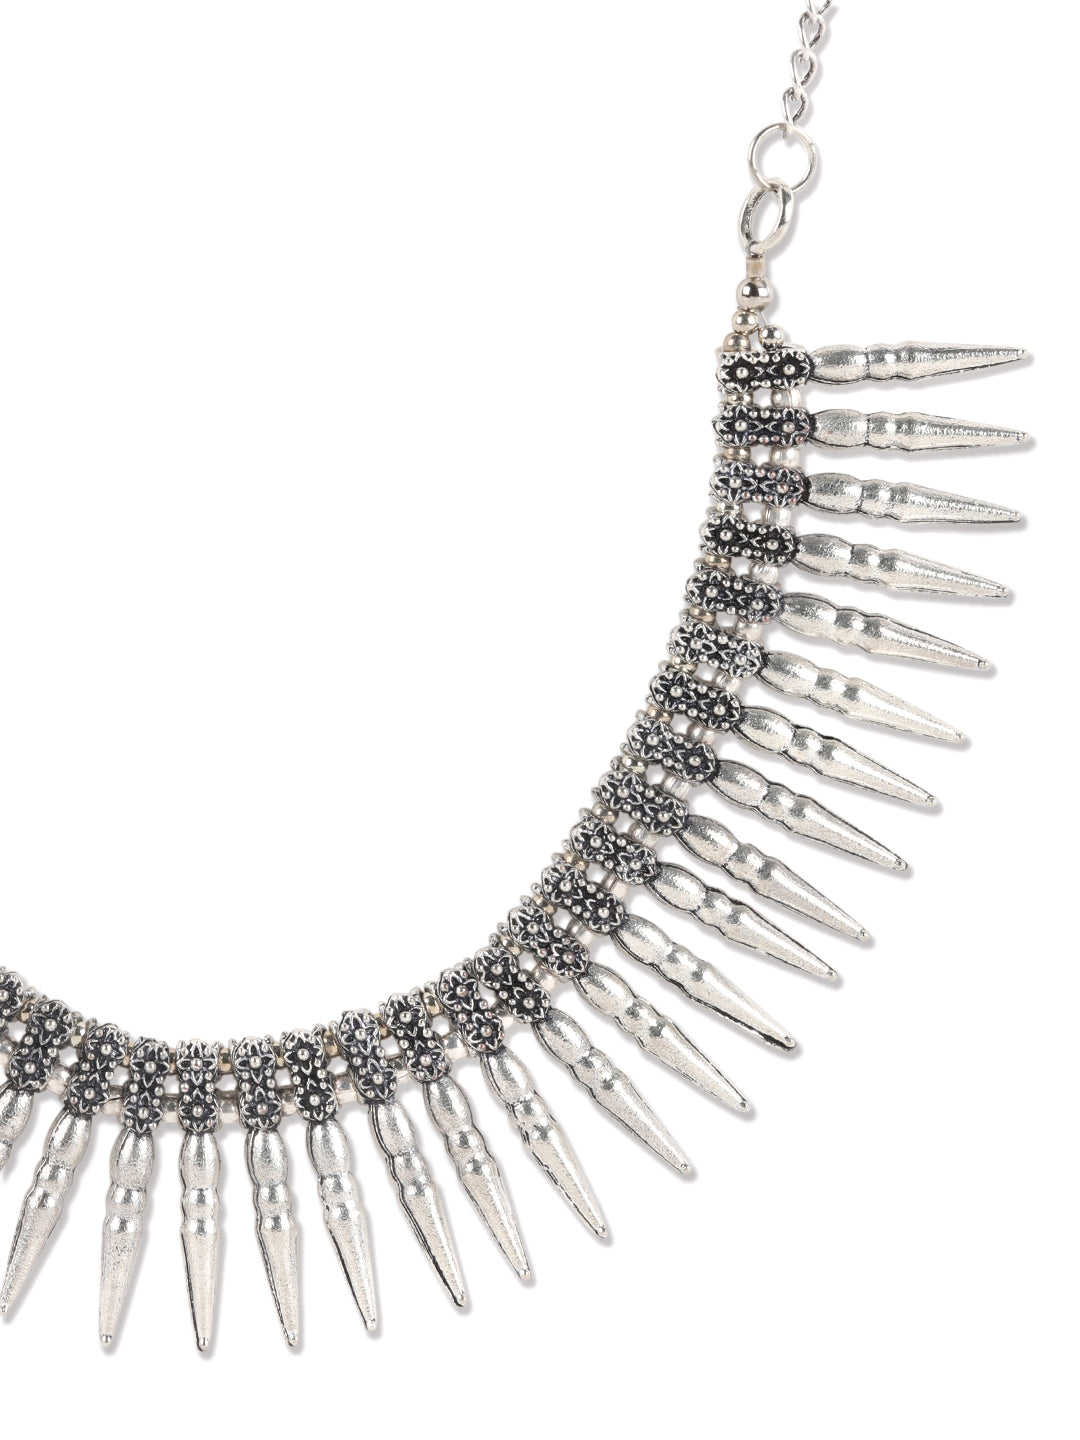 Silver-Plated Spiked Oxidized Tribal Necklace - Jazzandsizzle